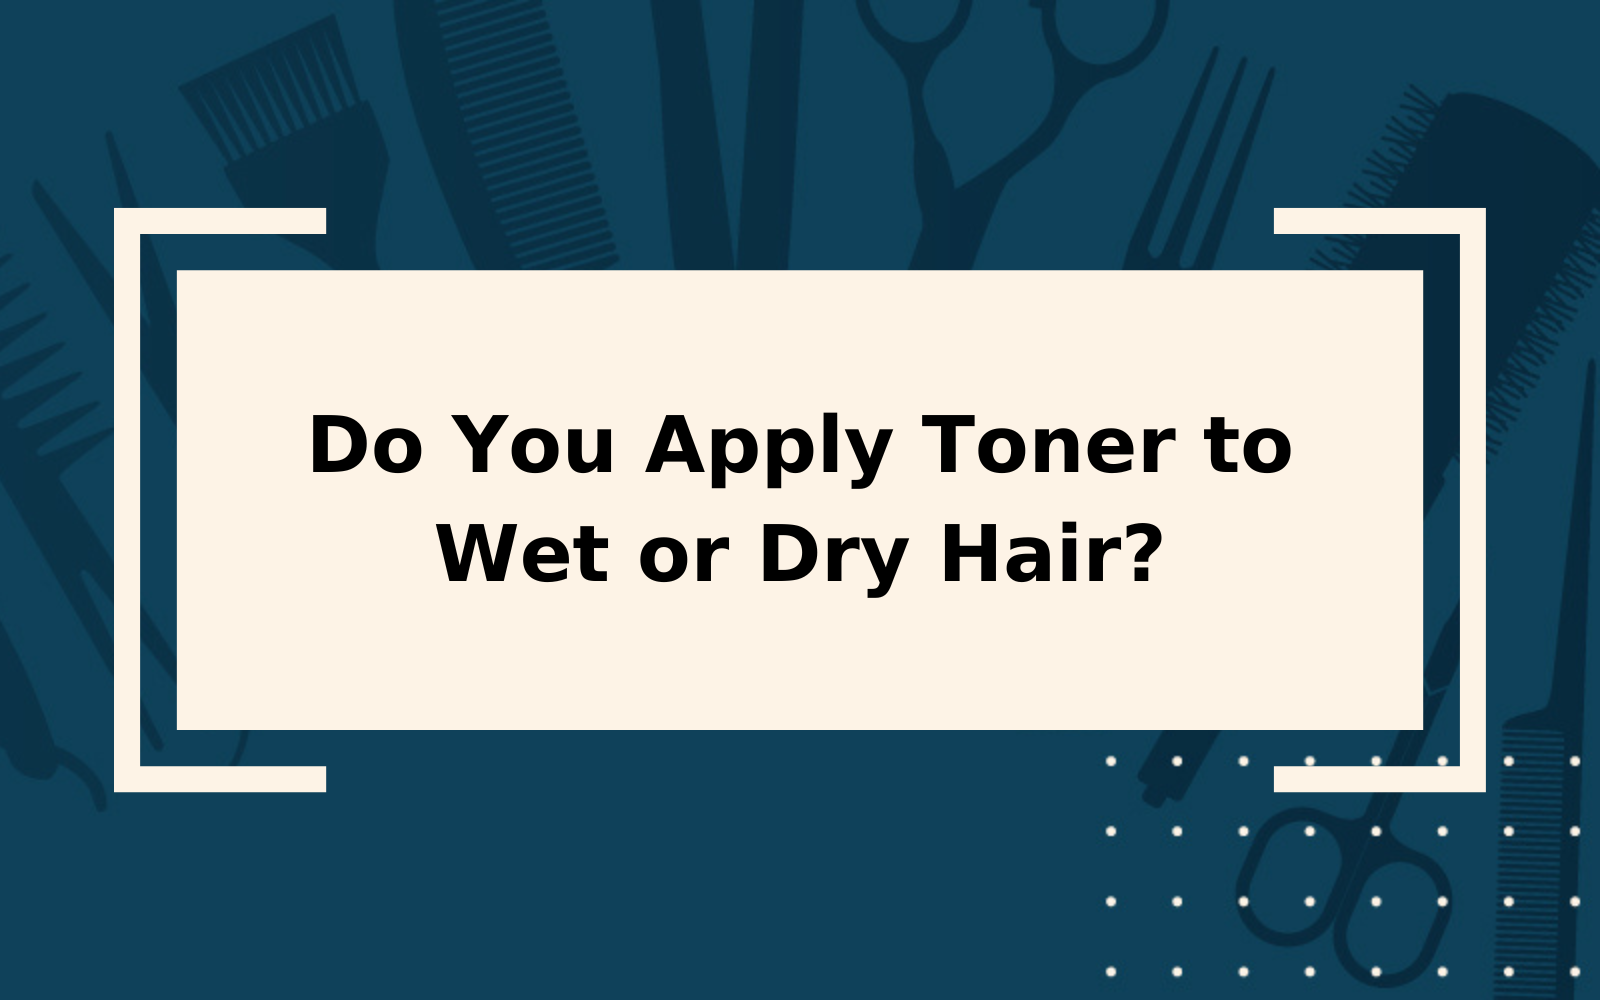 Do You Apply Toner to Wet or Dry Hair? | It’s Simple!